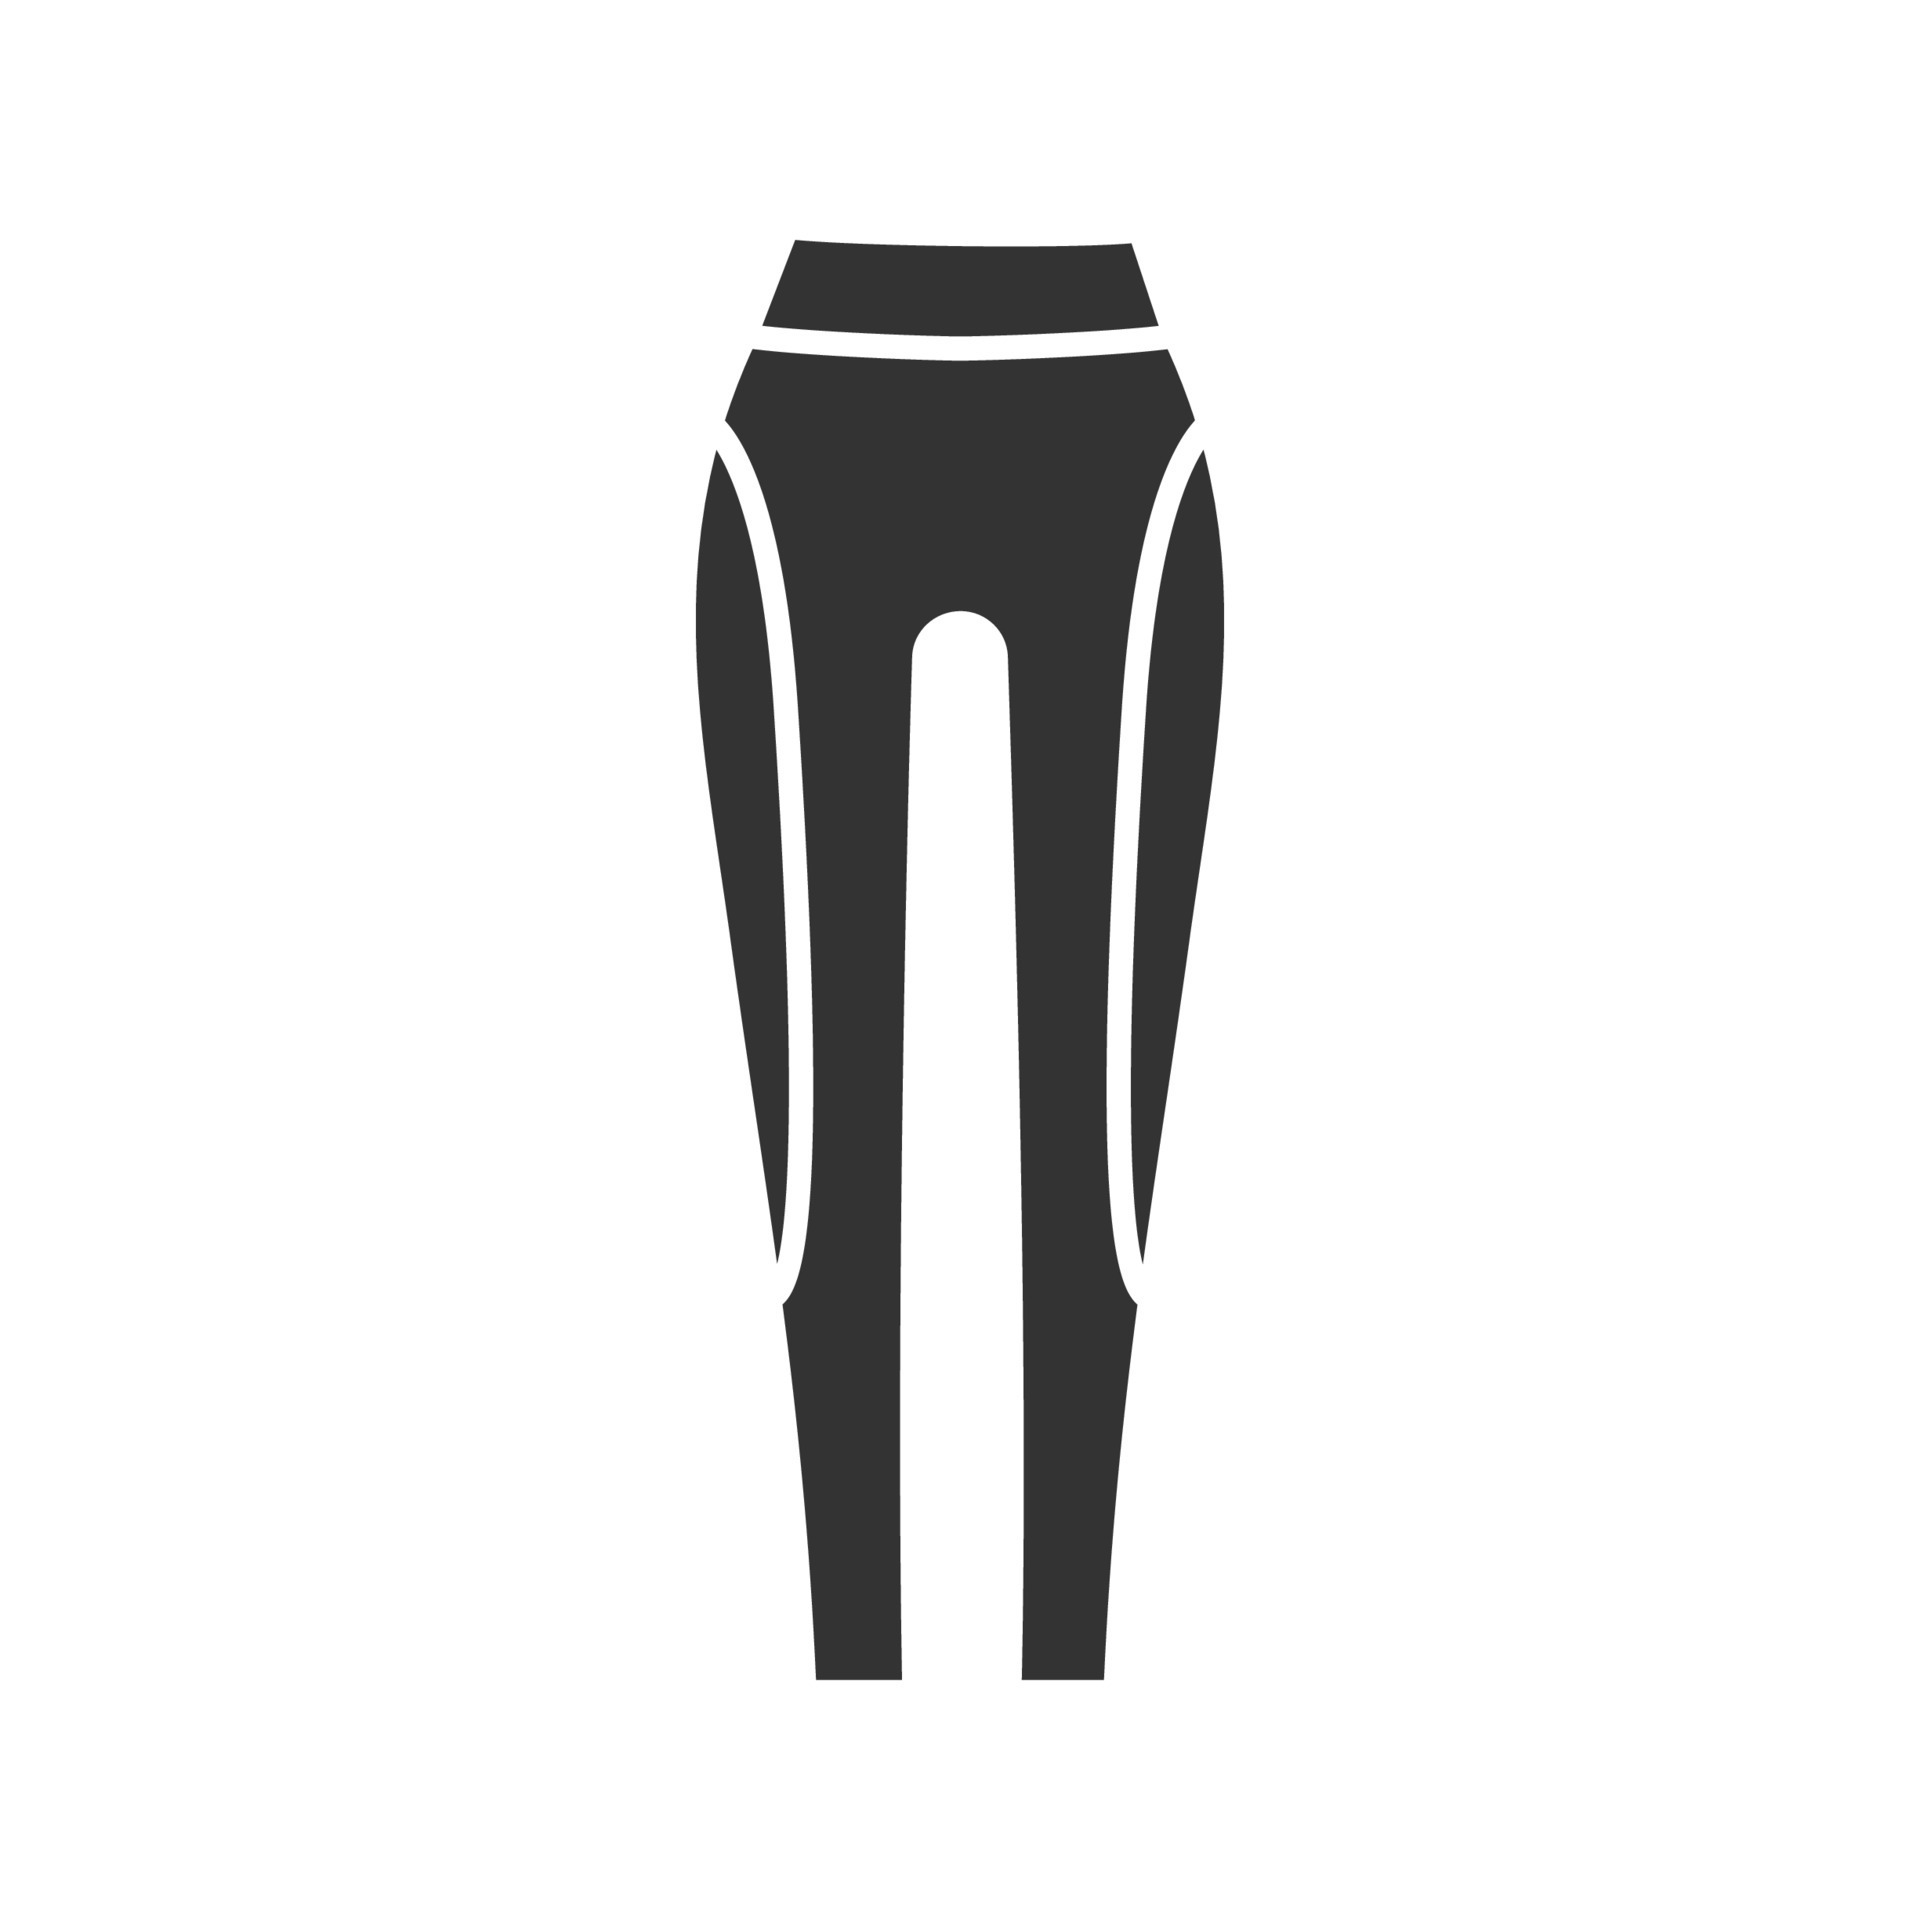 https://static.vecteezy.com/system/resources/previews/007/318/380/original/women-s-sports-pants-glyph-icon-leggings-activewear-silhouette-symbol-negative-space-isolated-illustration-vector.jpg